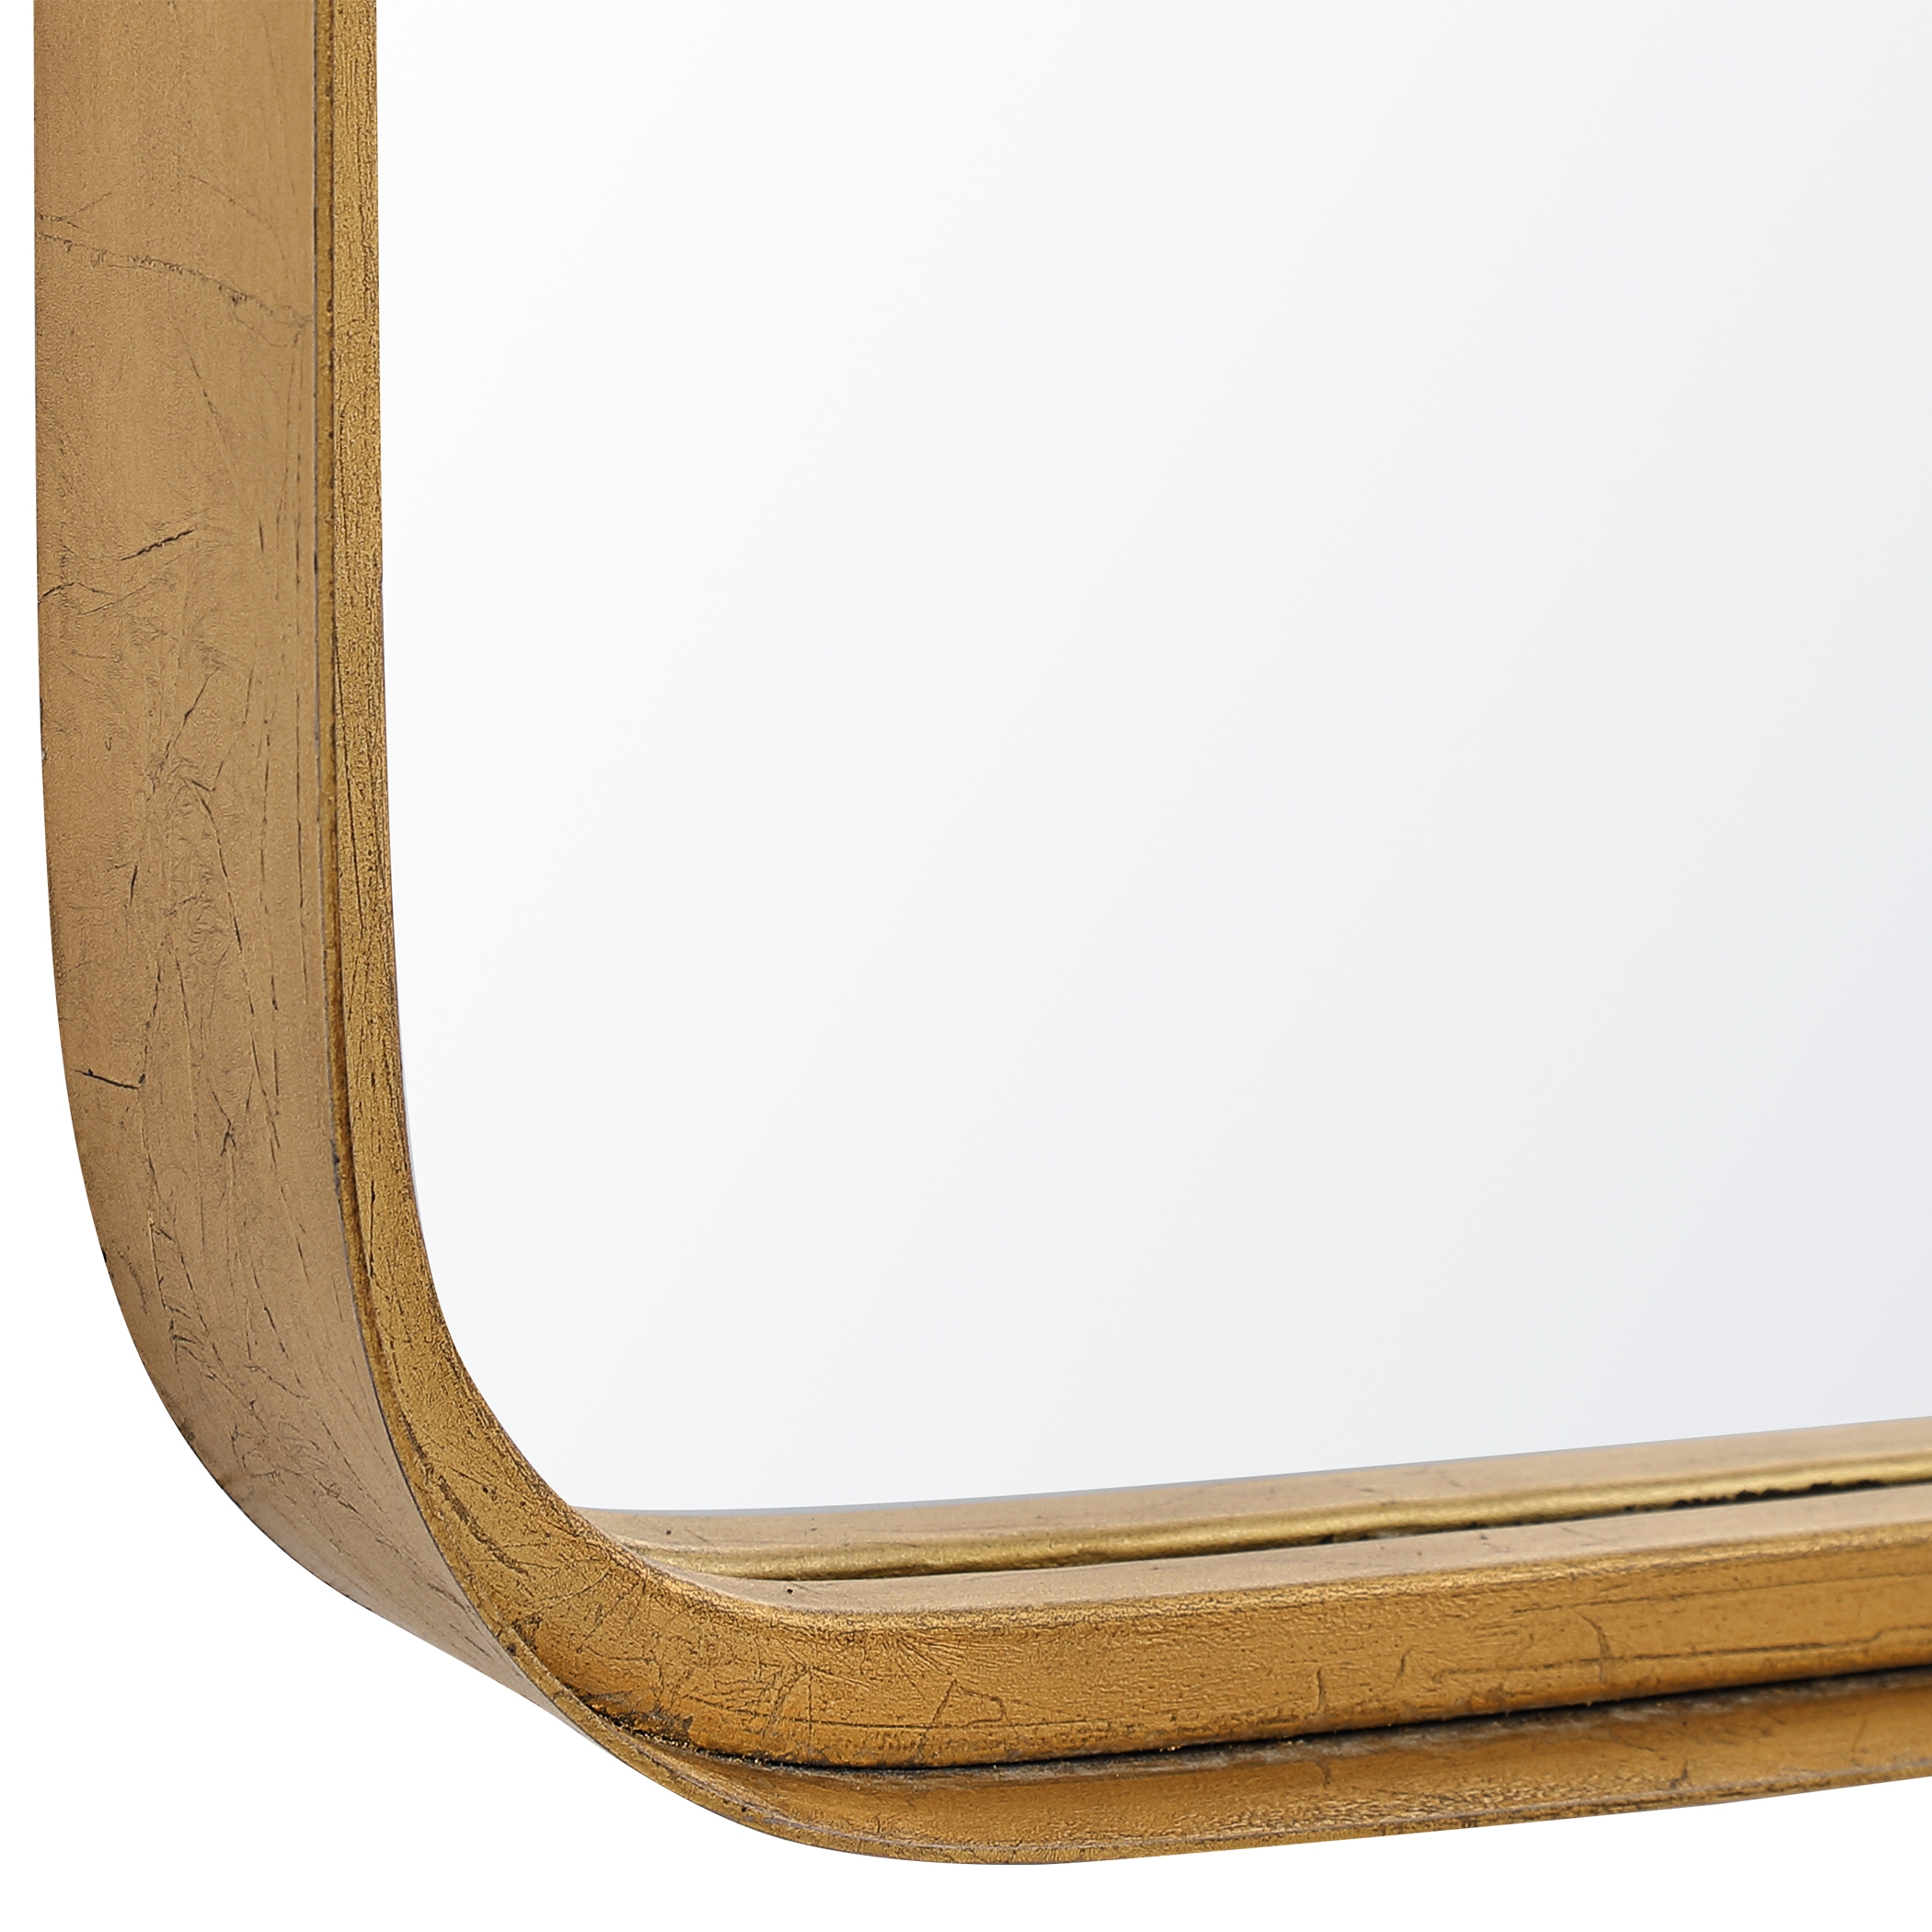 Rounded Corners Mirror - Image 3